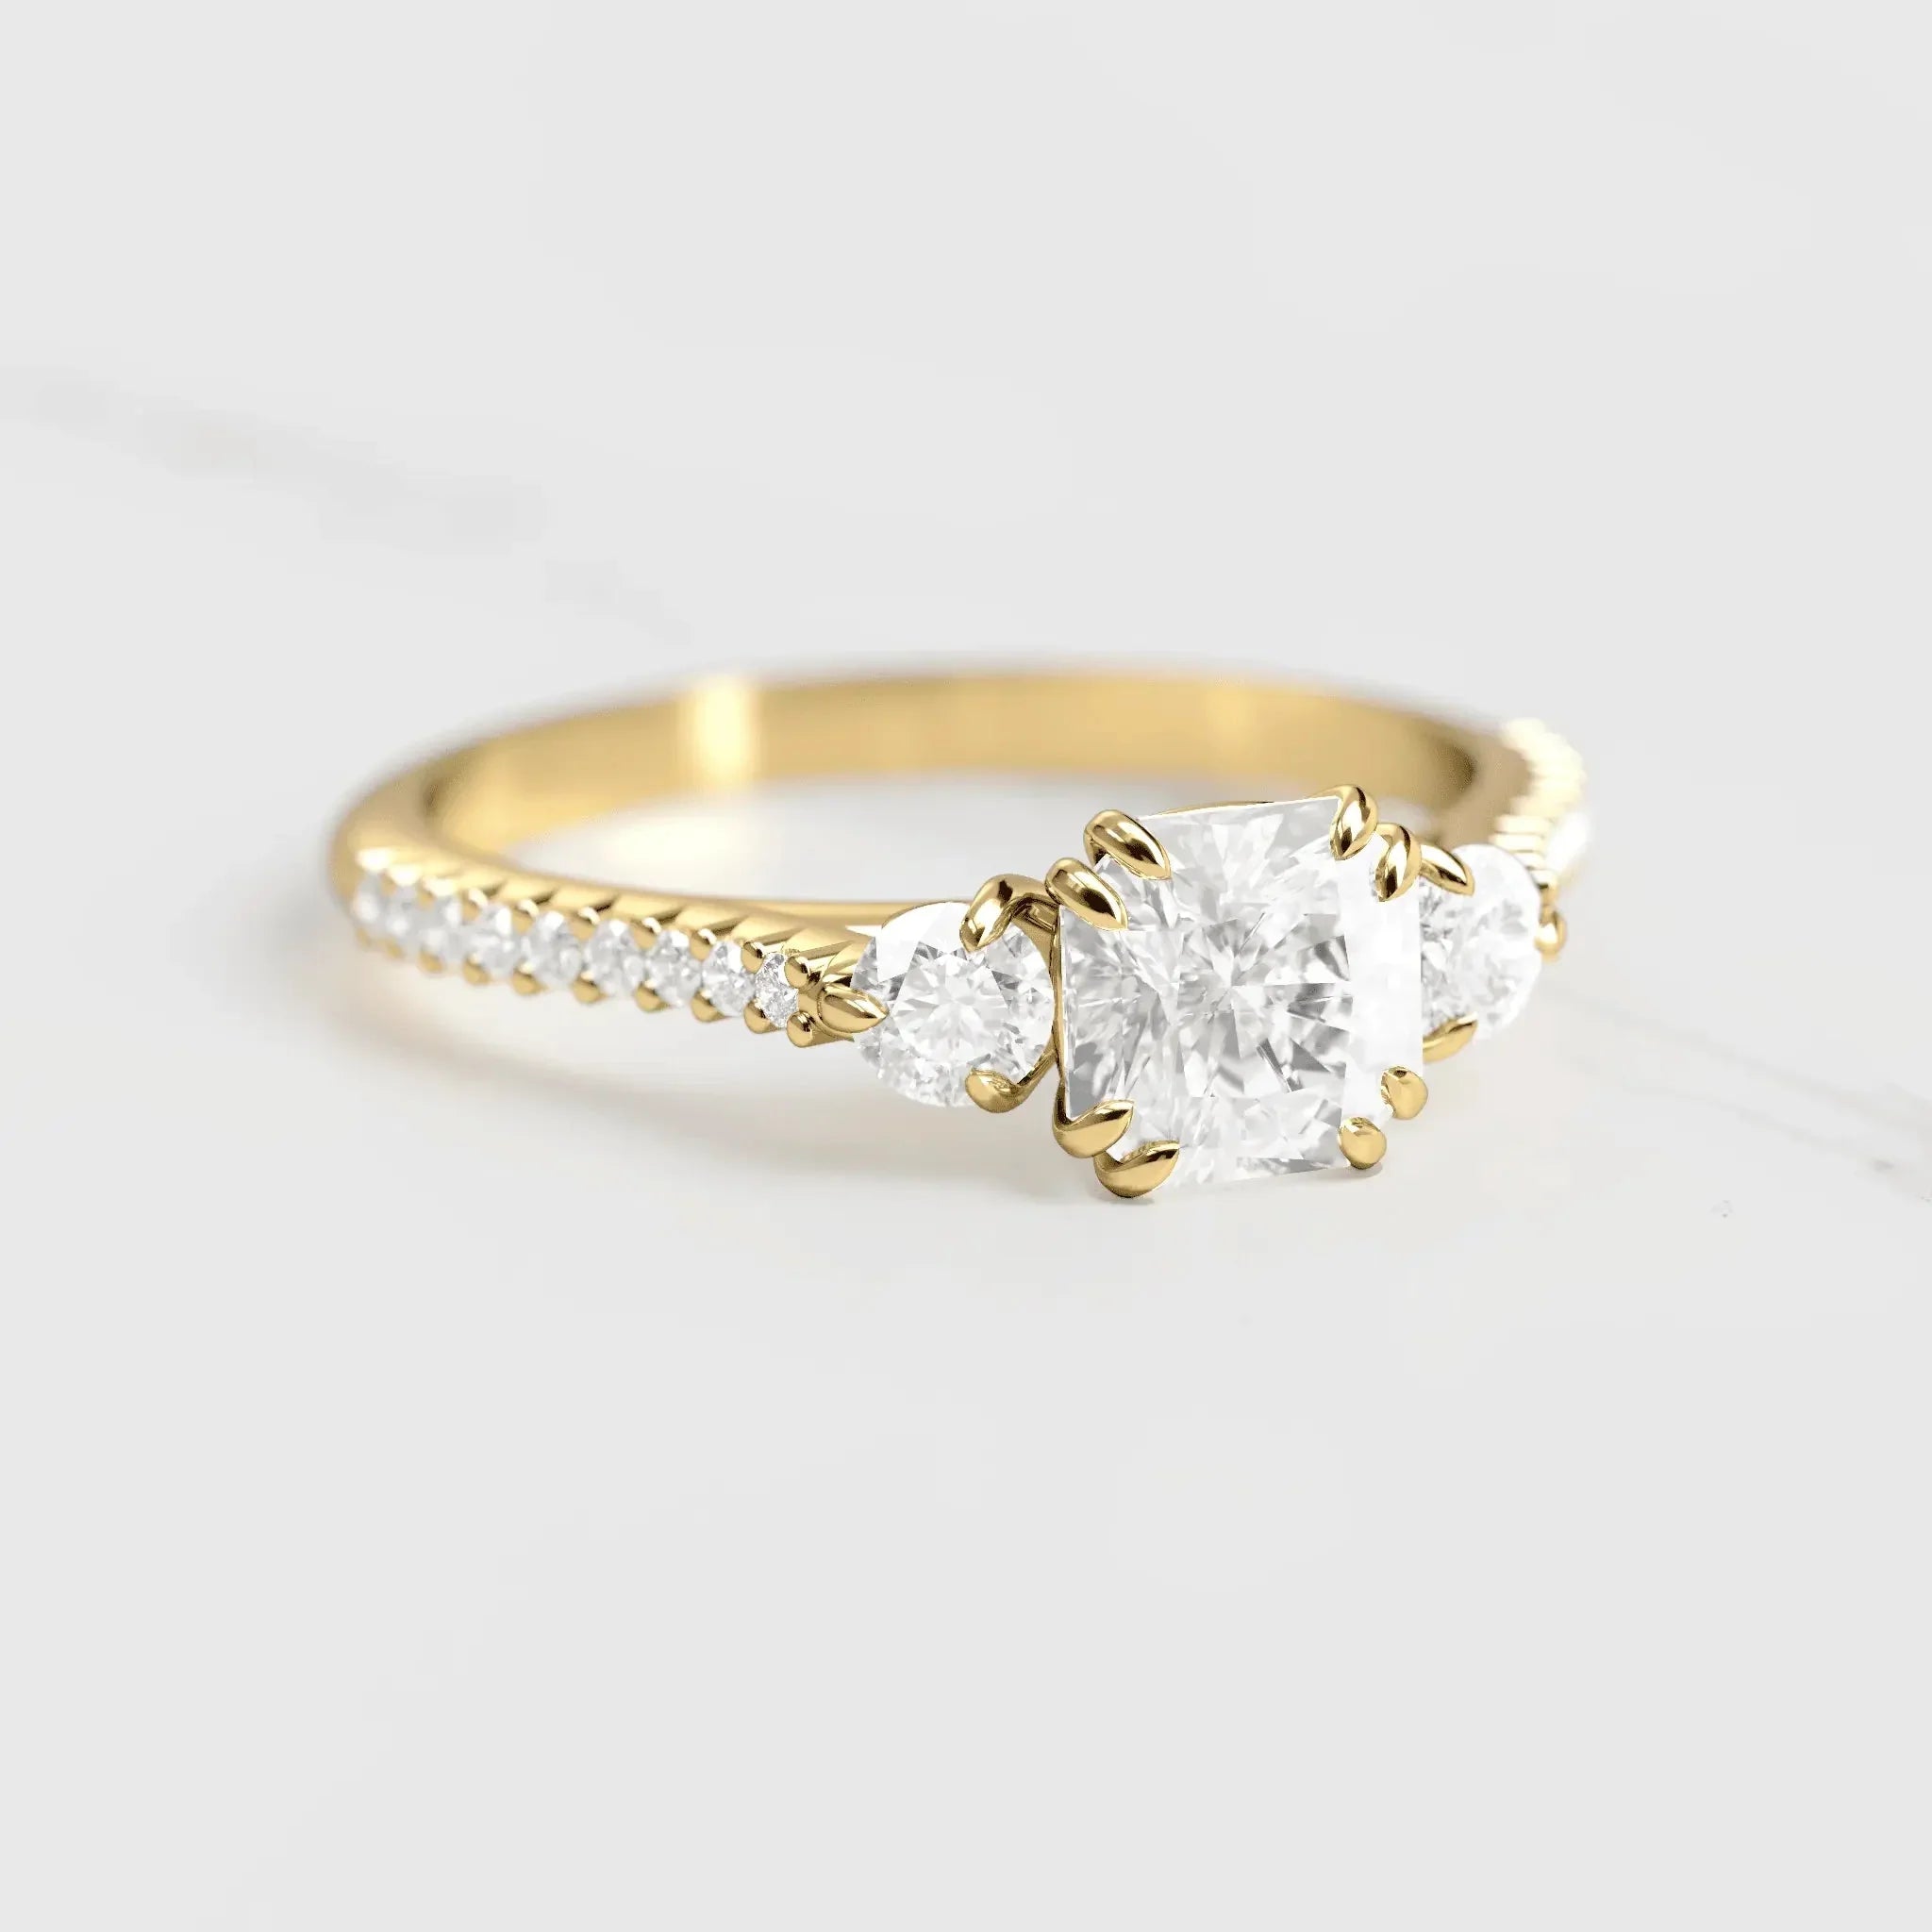 ASSCHER HALF PAVE DIAMOND RING WITH ACCENT STONES - 18k yellow gold / 0.75ct / lab diamond